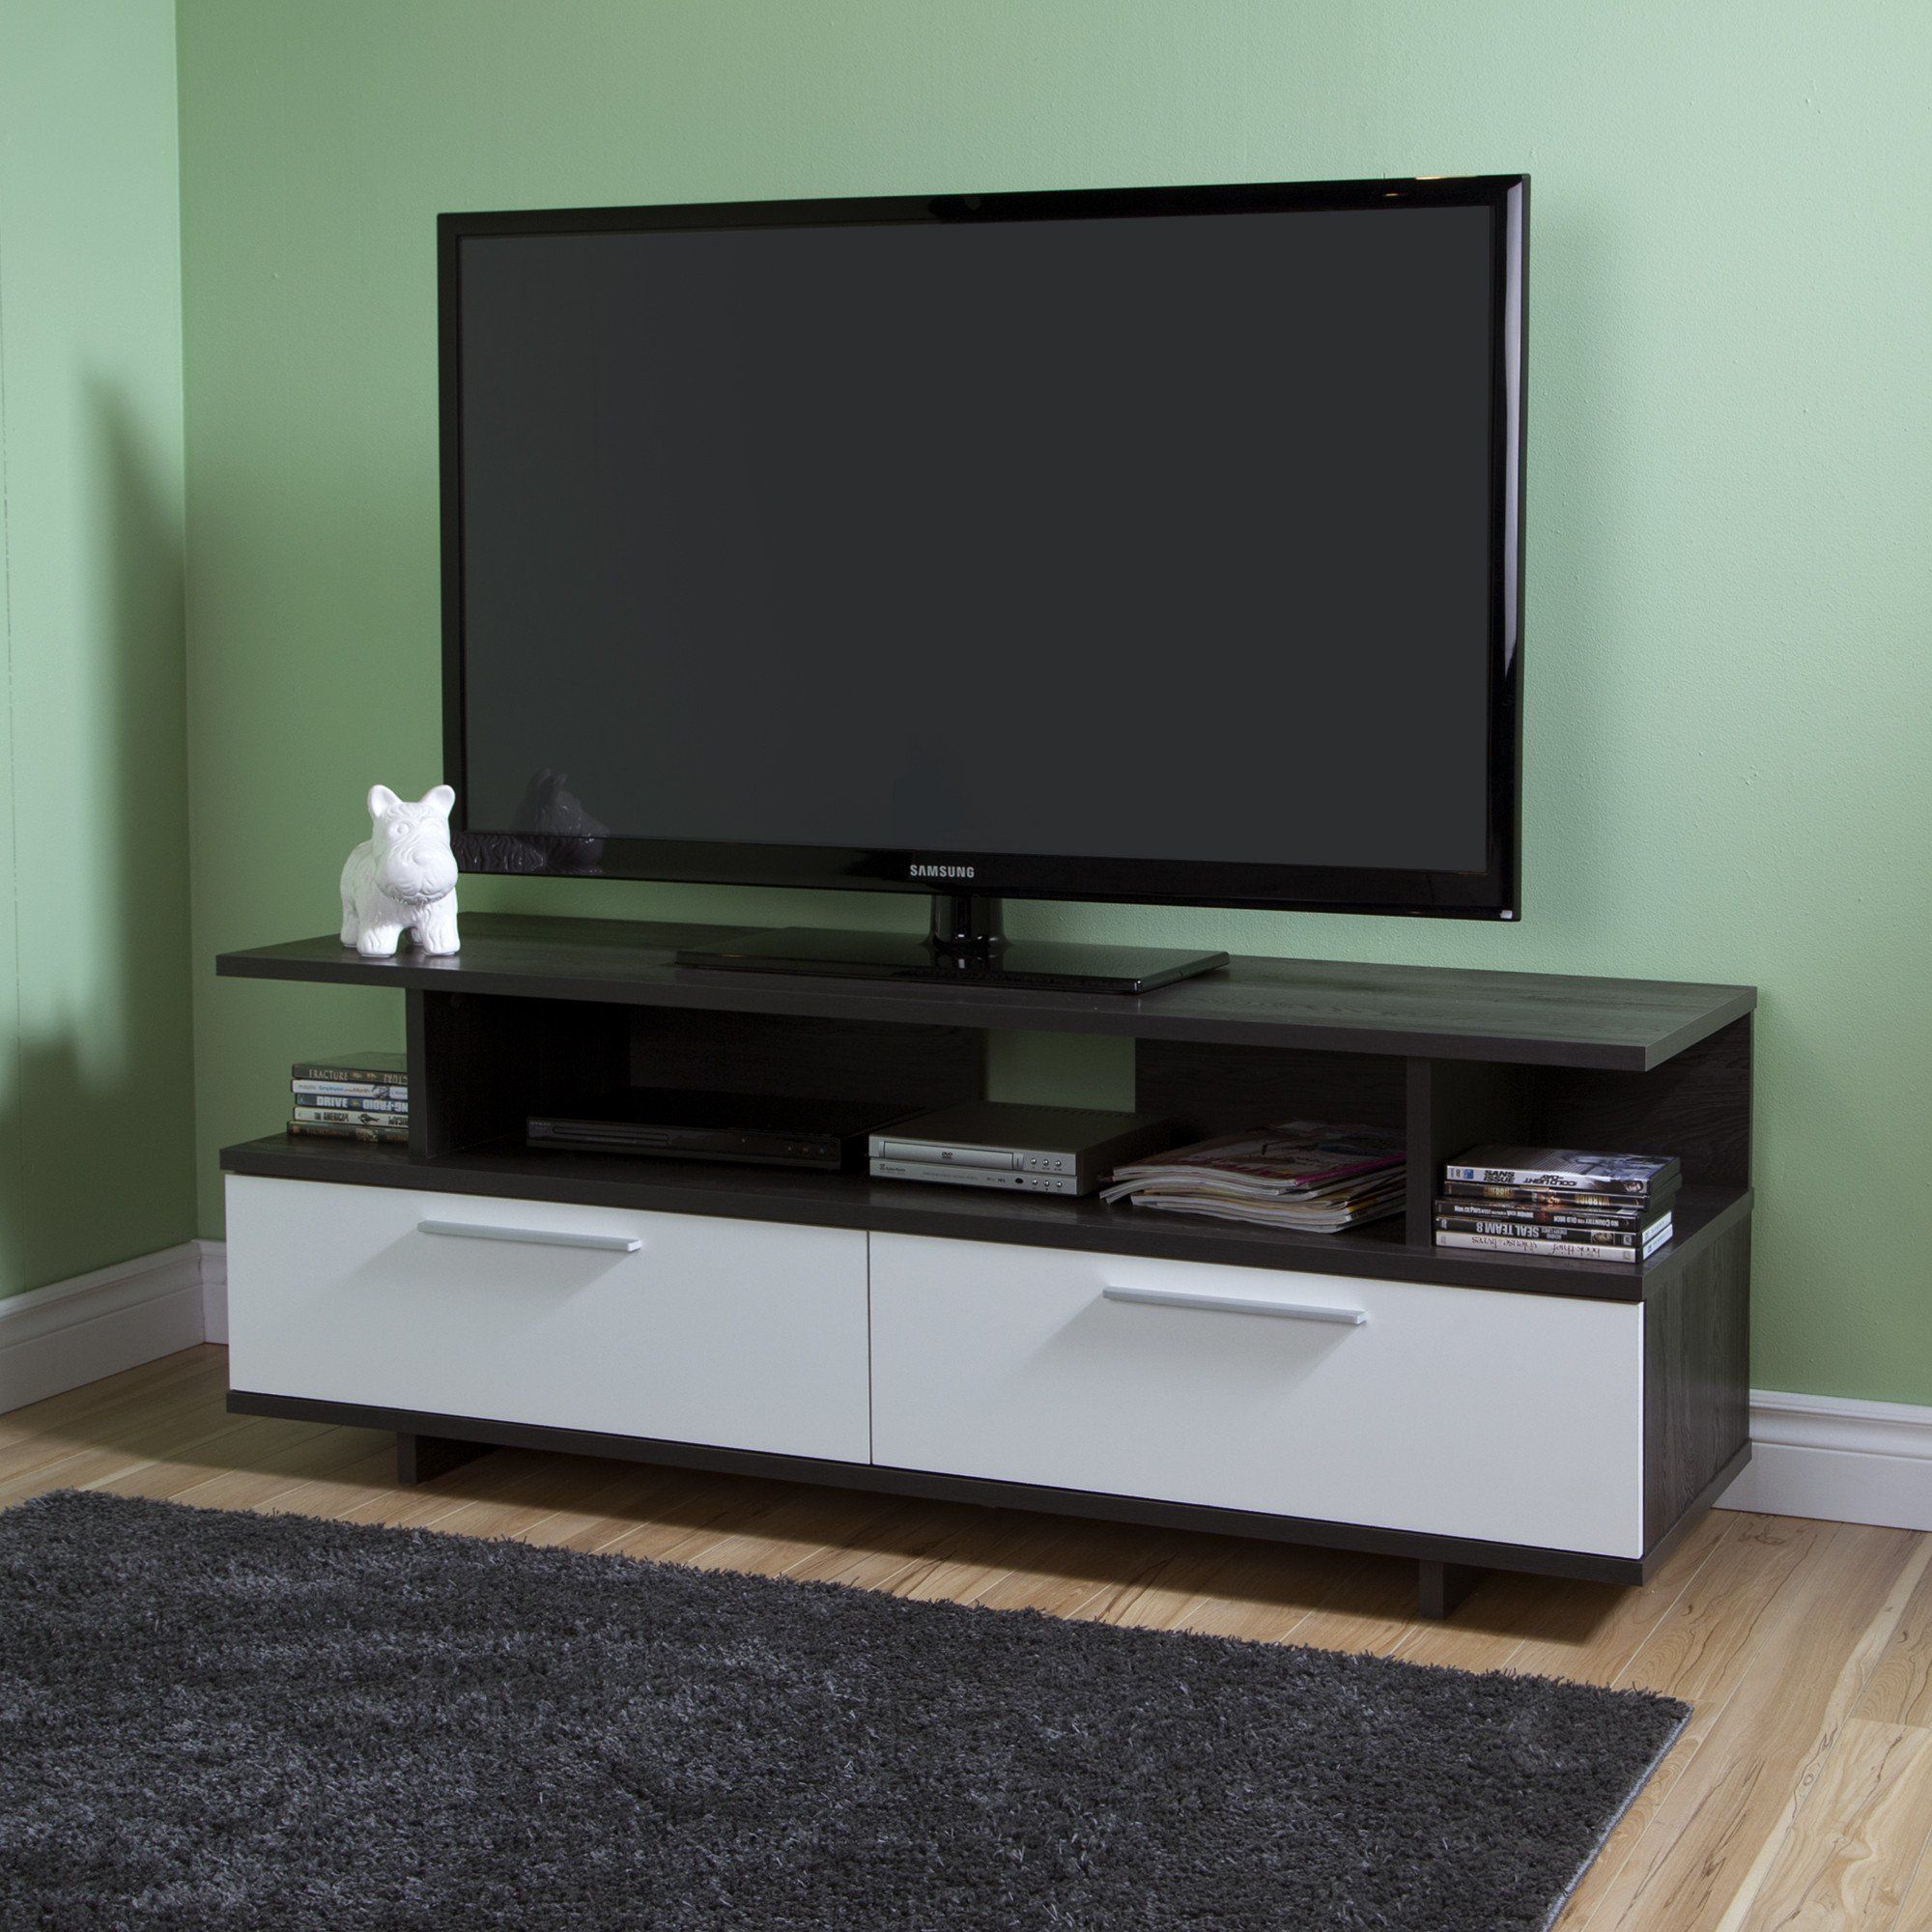 Reflekt Tv Stand With Drawers, For Tvs Up To 60 Inches Within Adayah Tv Stands For Tvs Up To 60" (View 3 of 15)